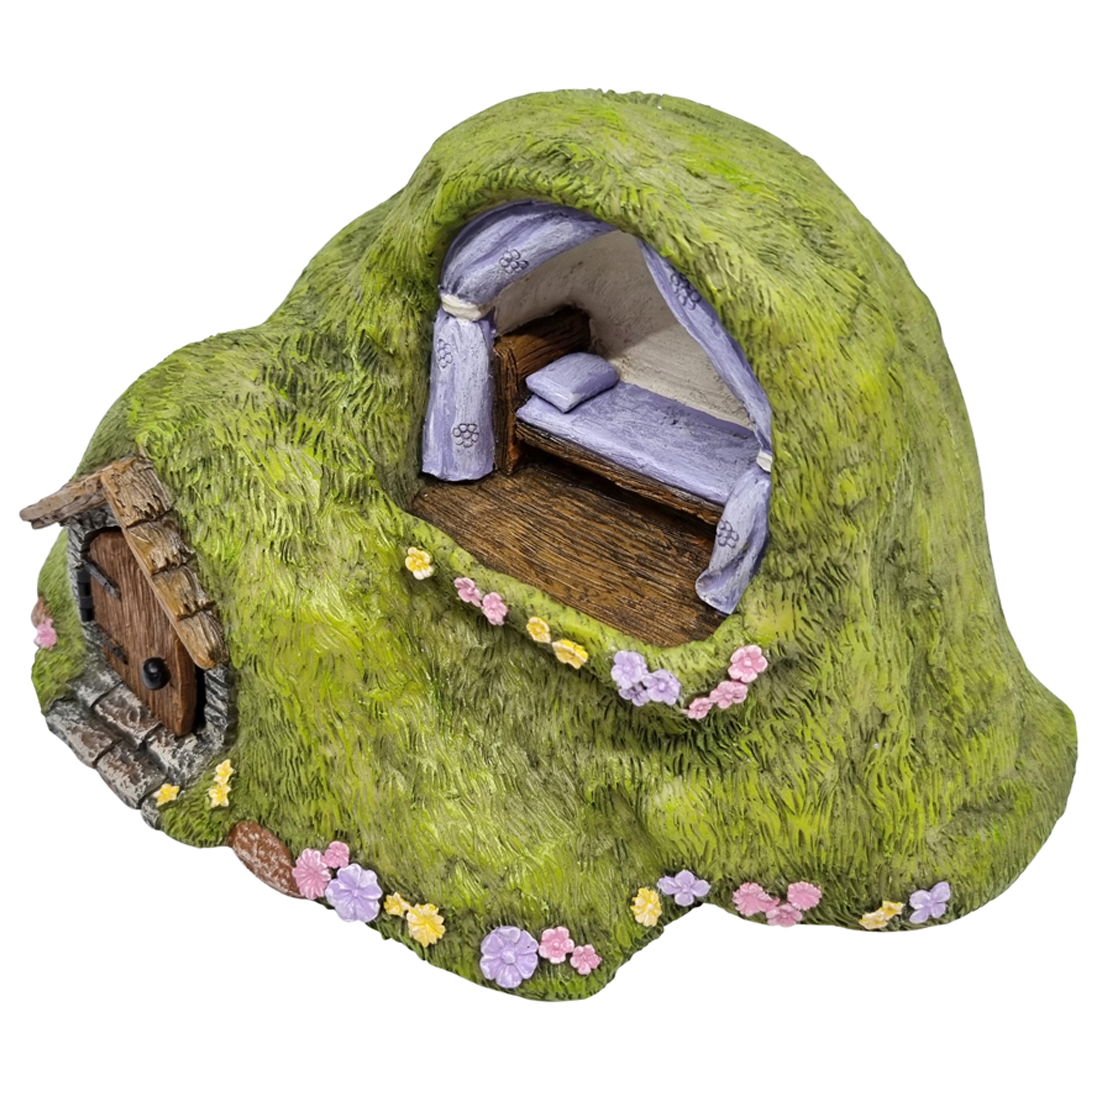 Turf House With A Day Bed Alcove and Opening Door